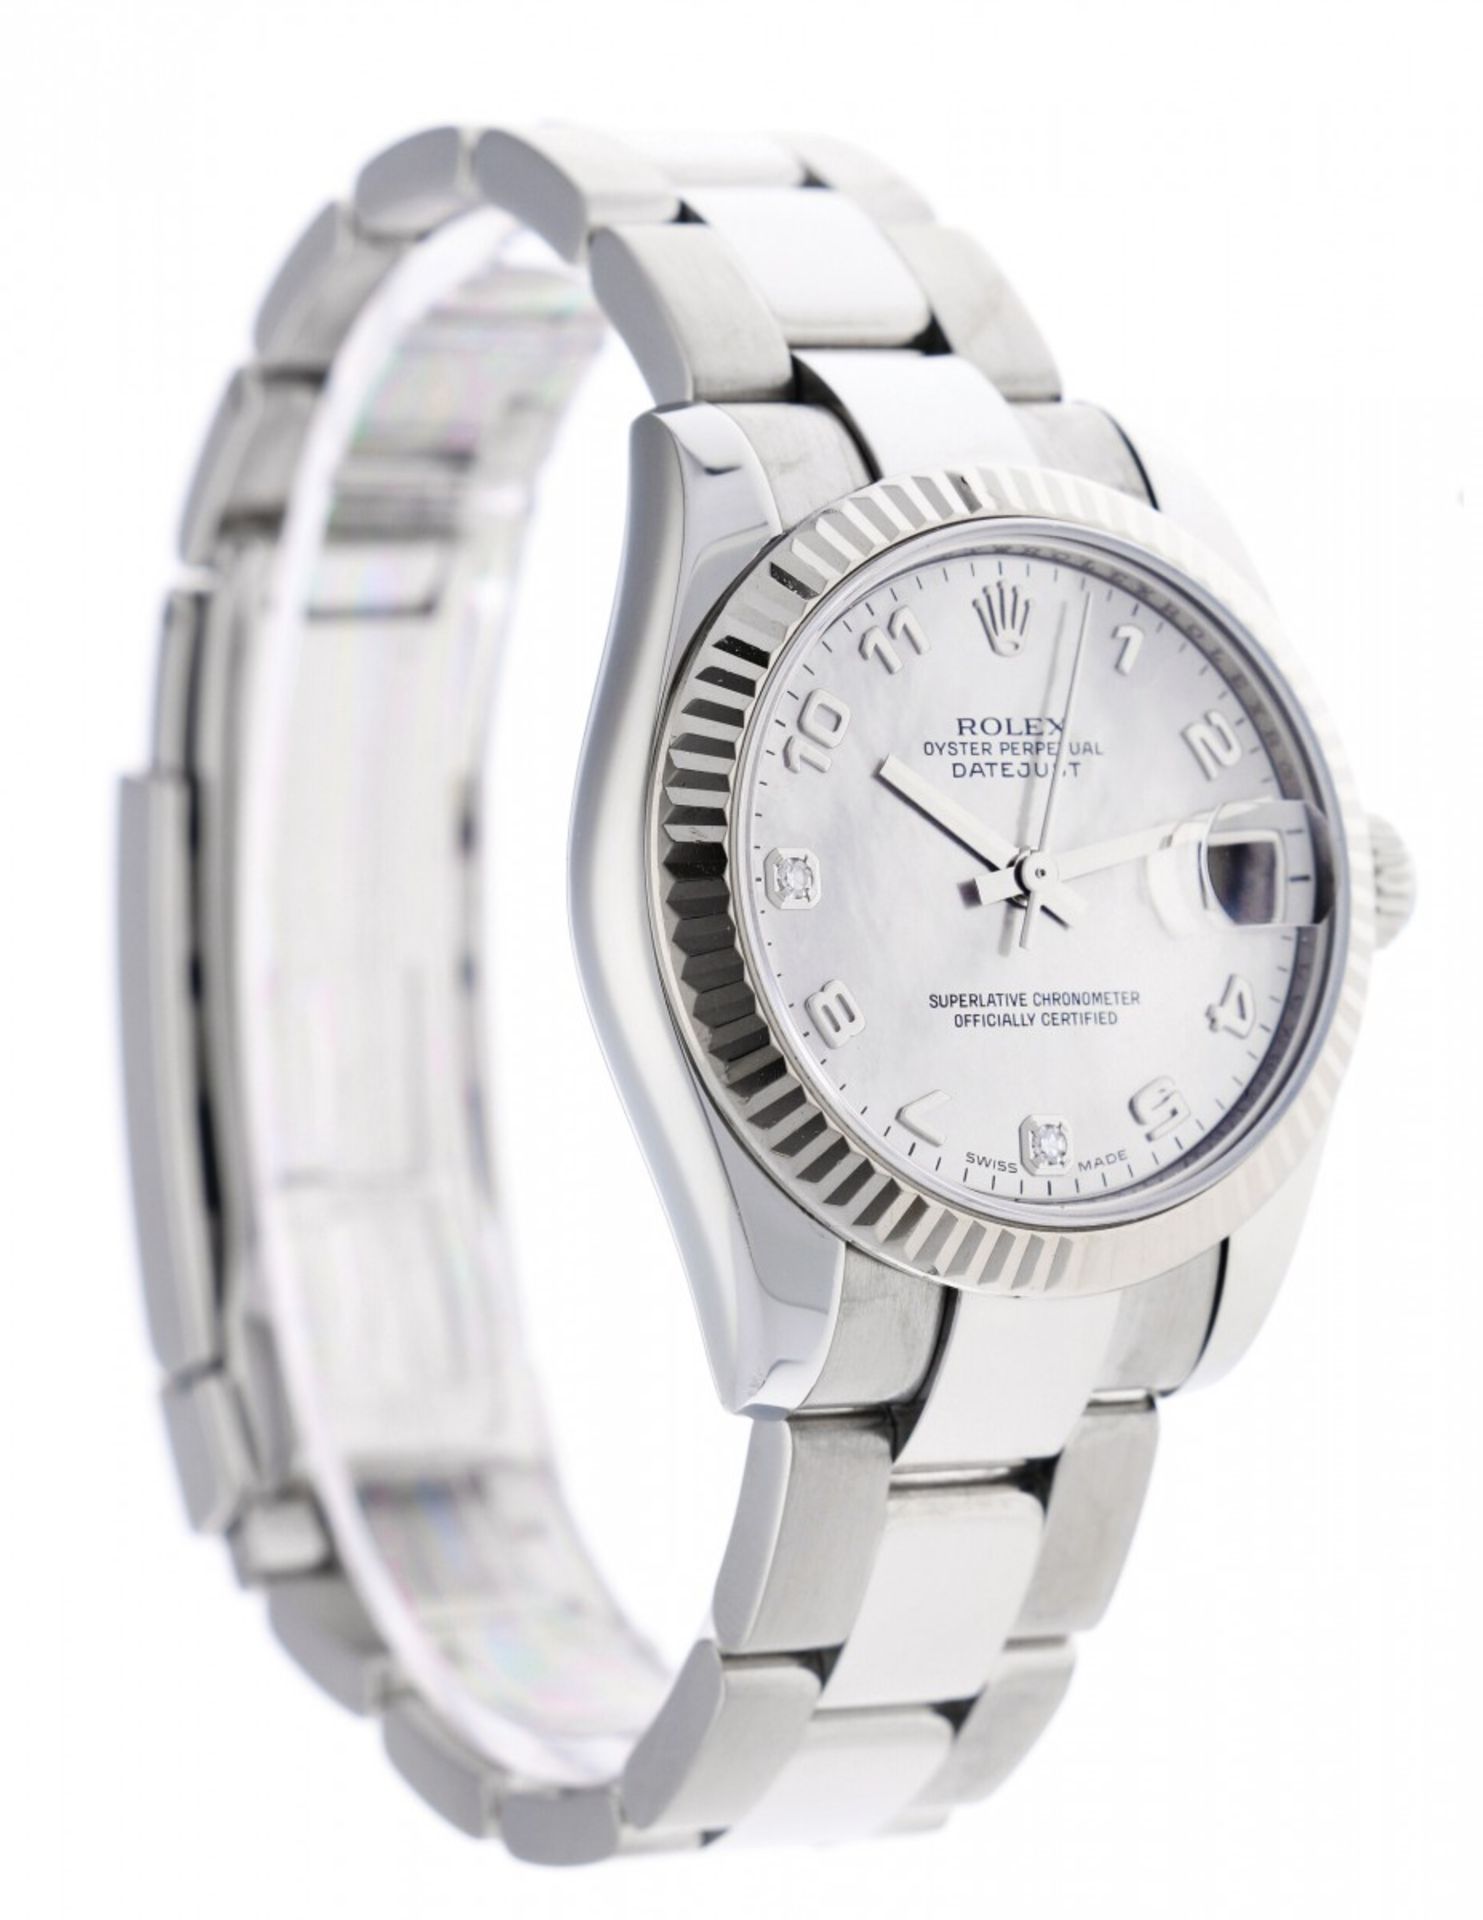 Rolex Datejust 178274 MOP Dial - Ladies Watch - approx. 2007 - Image 3 of 6